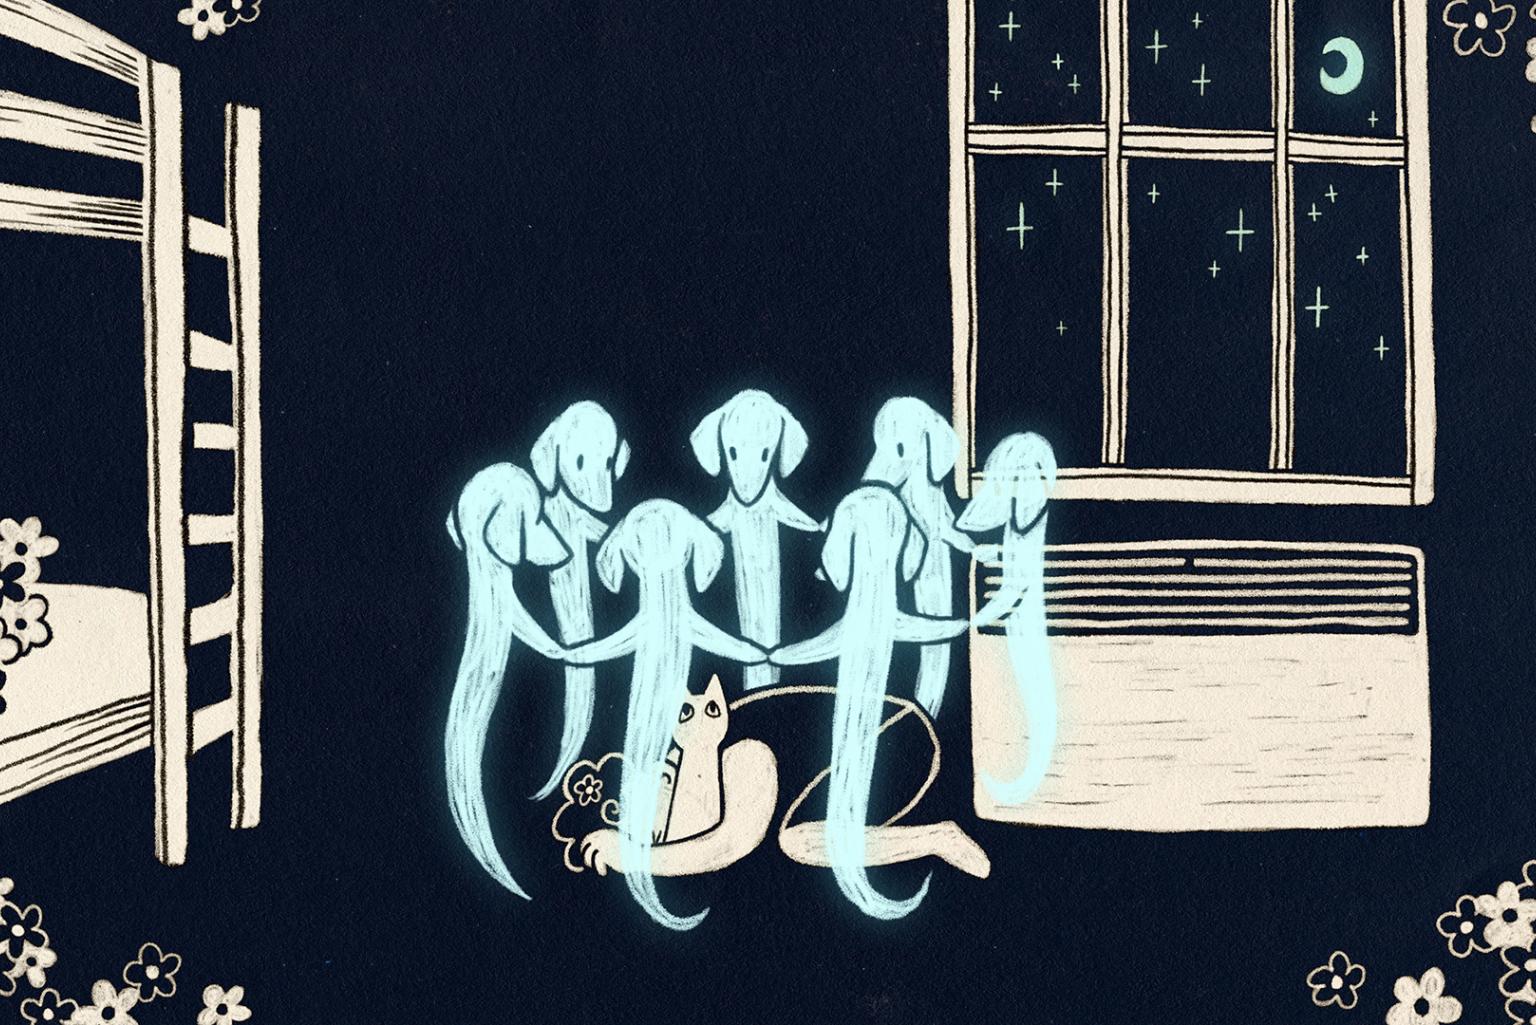 The drawing shows bluish ghosts with dachshund heads floating in a circle around a person lying on the ground. The person is huddled and looks sad. The background is black. On the sides there is a bed and a window with night sky.